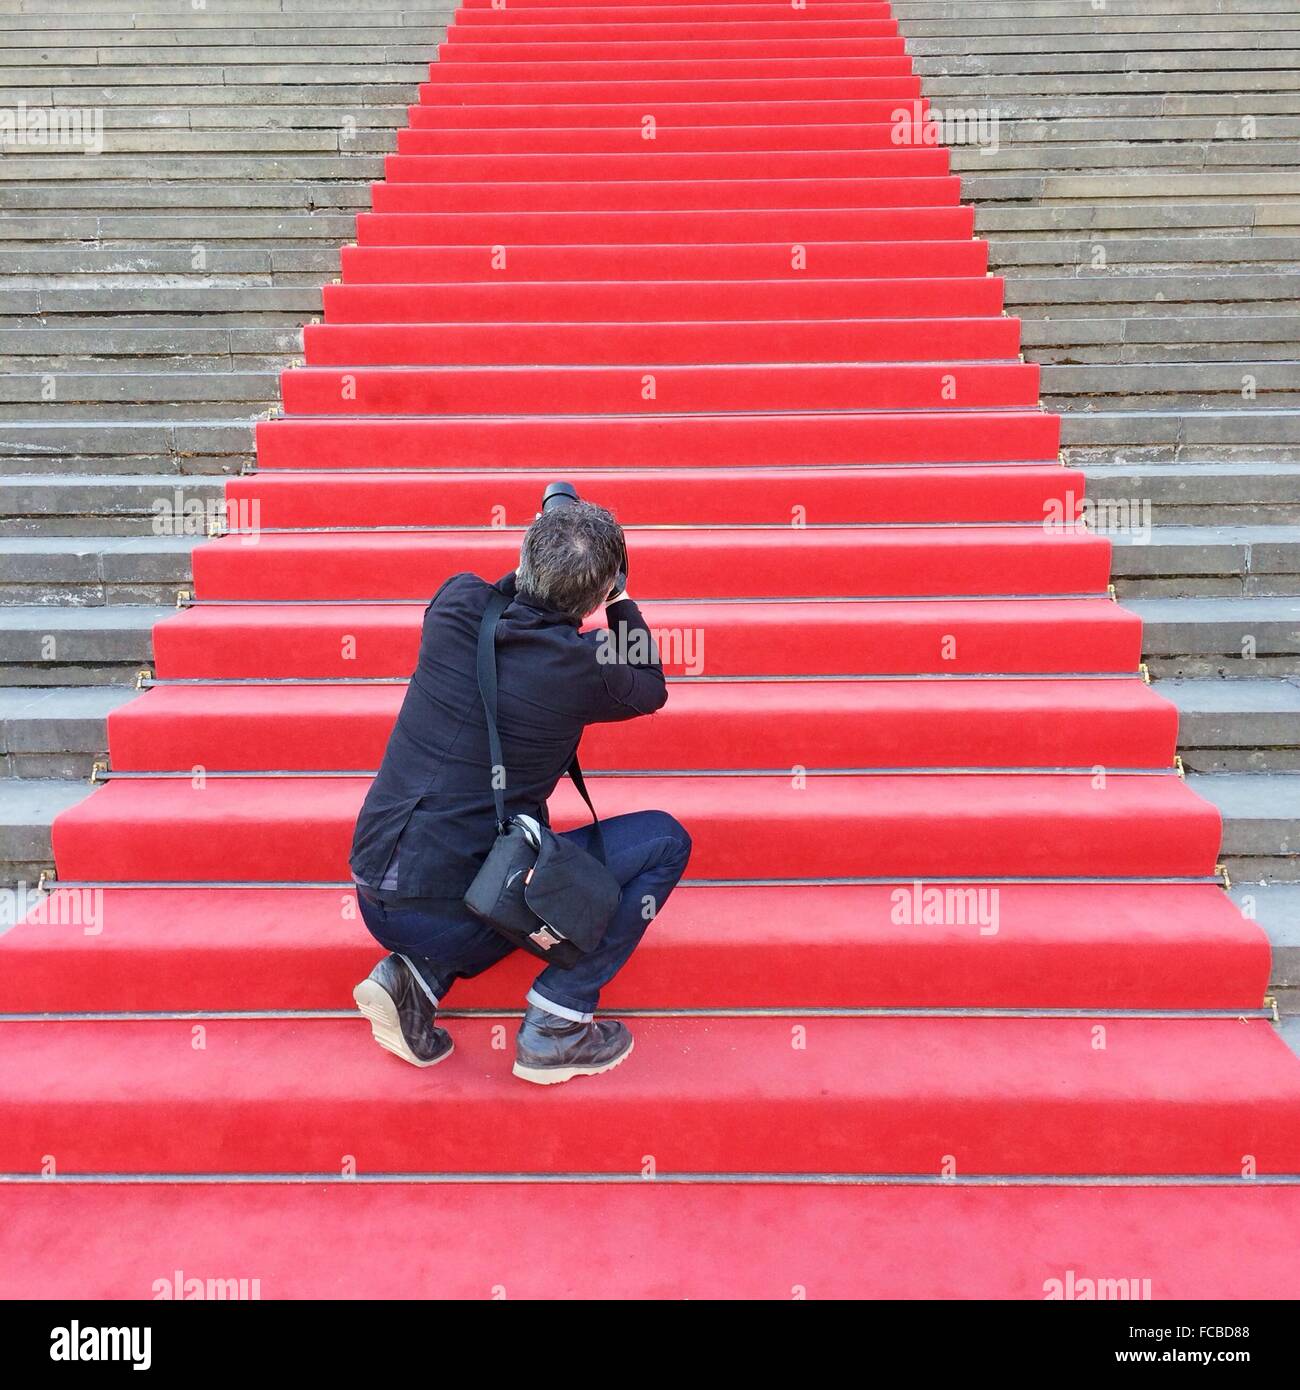 Rear View Of A Male Paparazzi On Red Carpeted Stairs Stock Photo